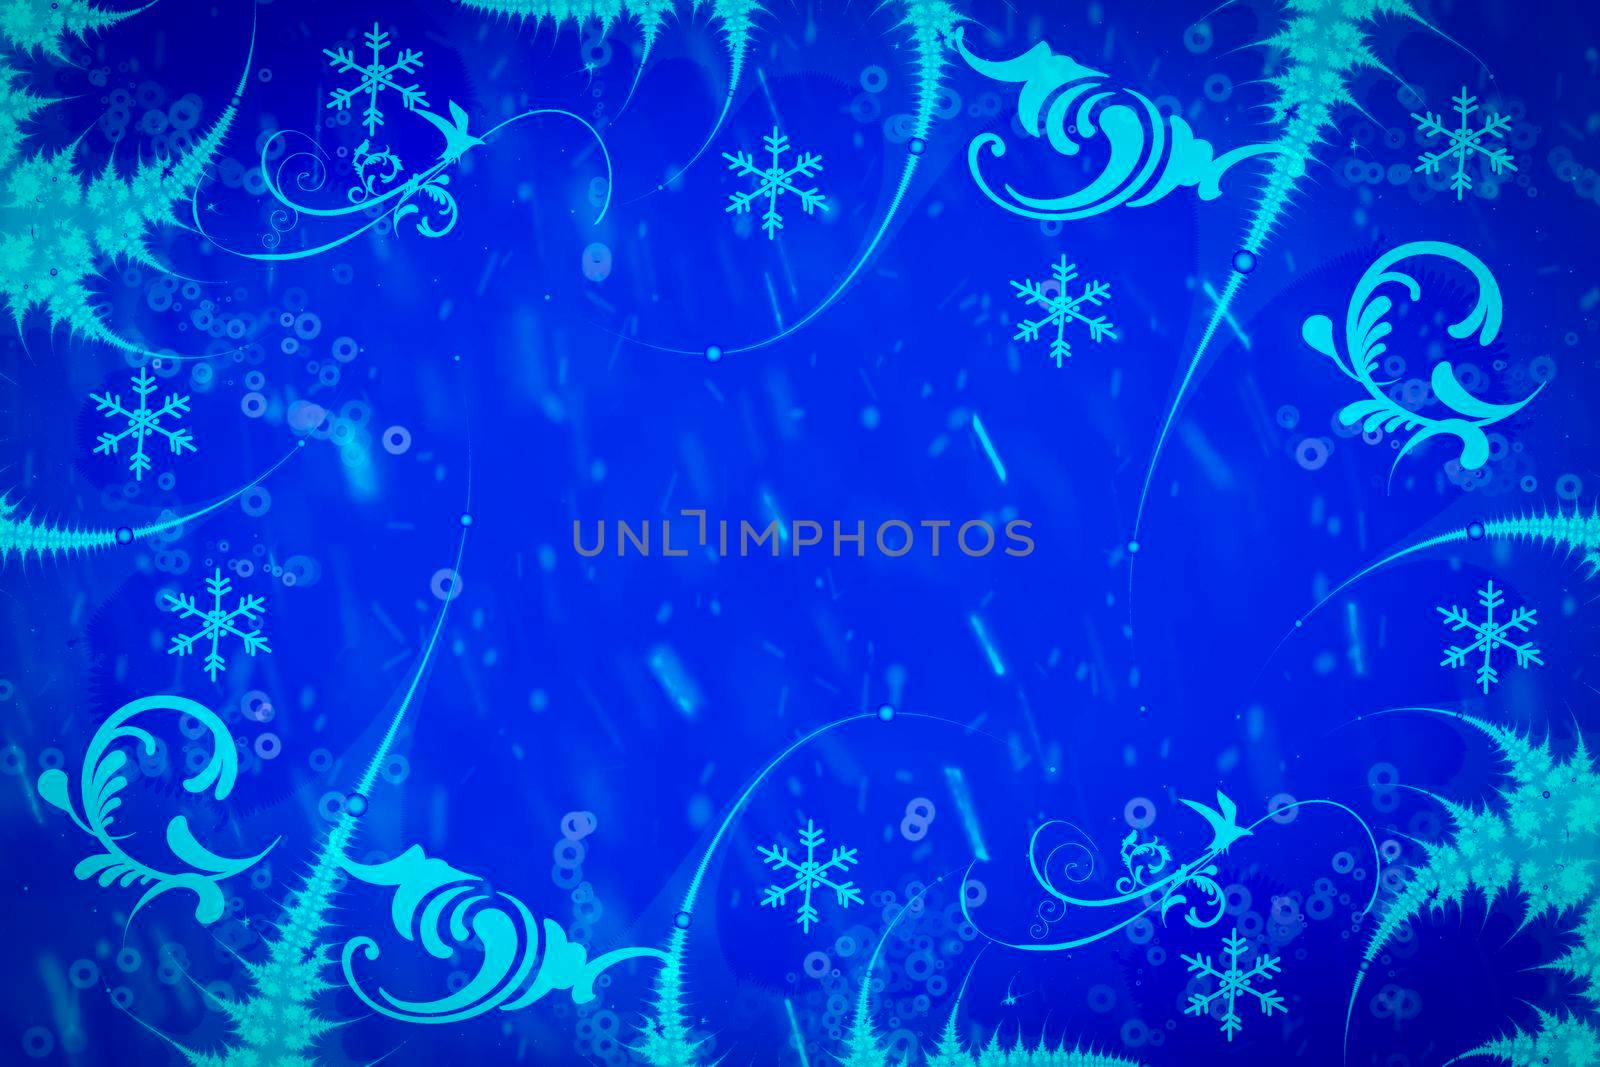 Beautiful festive background with snowflakes for Christmas and New year greetings.